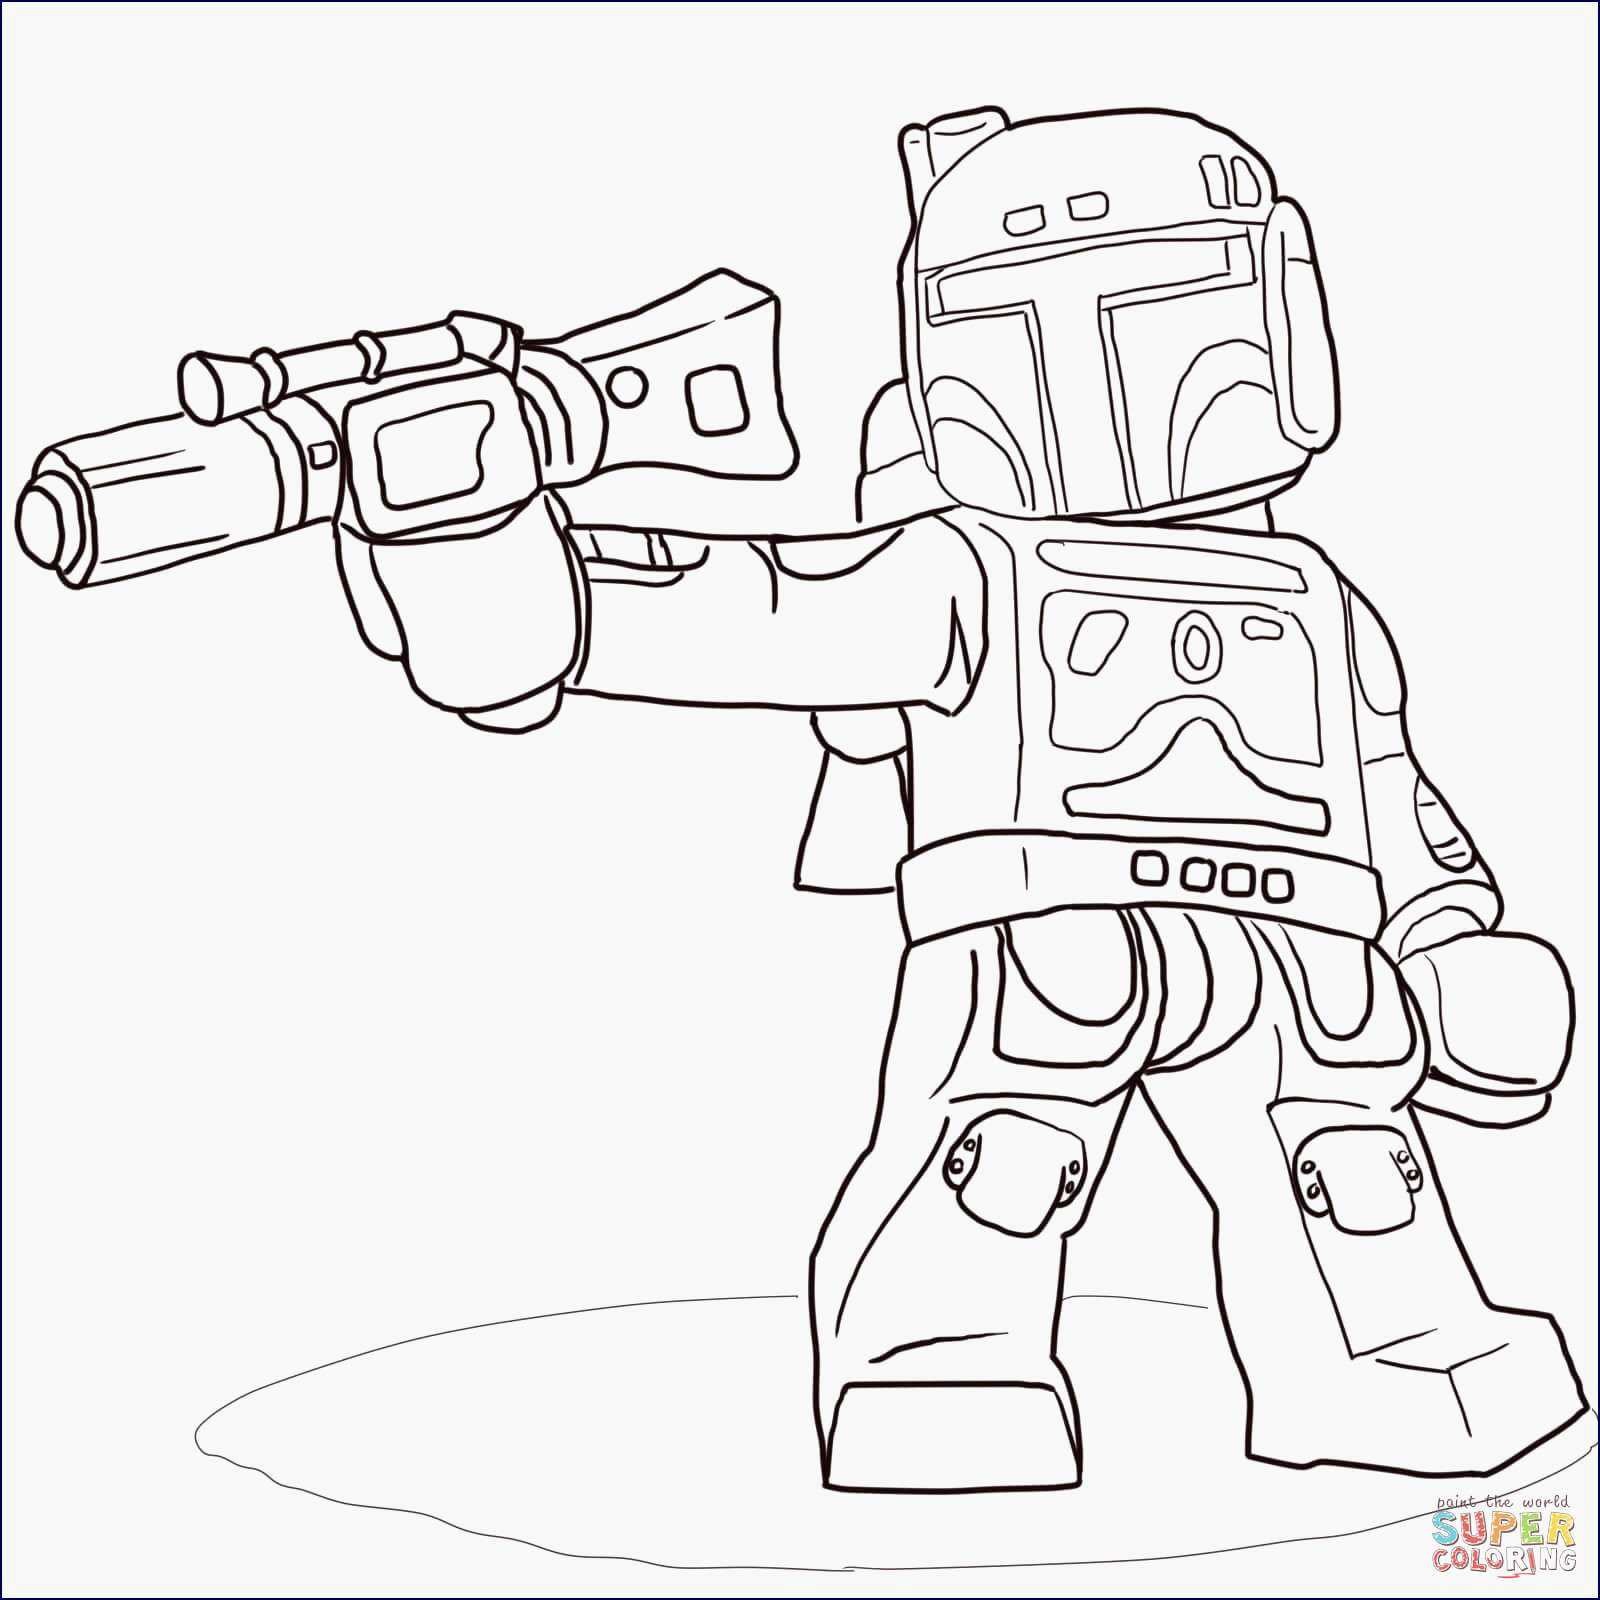 Coloring Pages : Coloring Free Pages Lego Star Wars Clone ...